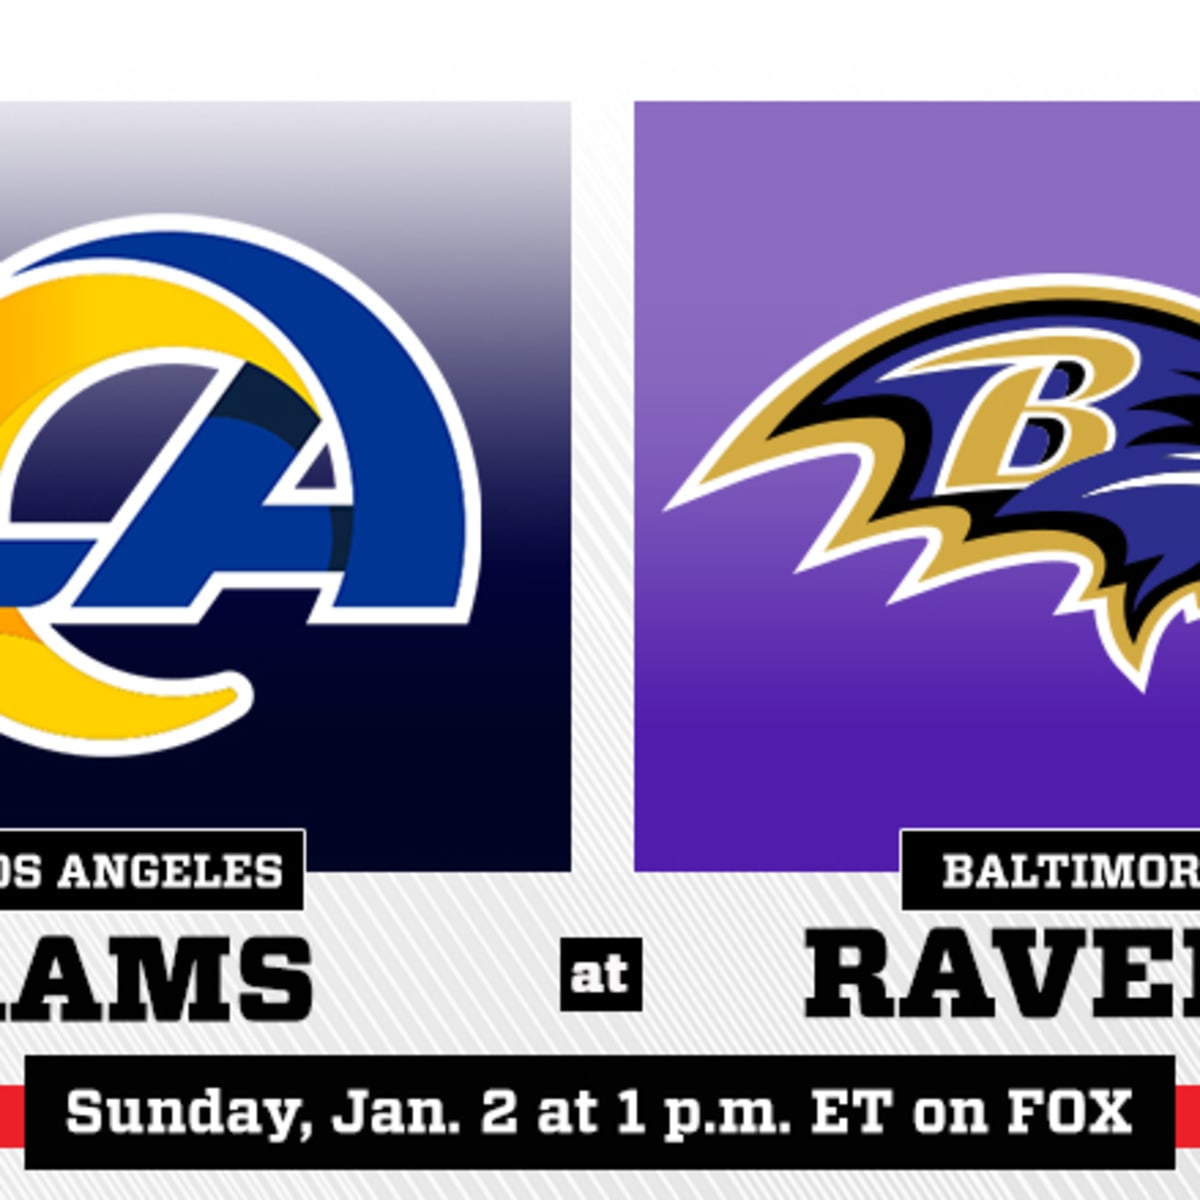 Game Release: Ravens vs. Rams by Baltimore Ravens - Issuu